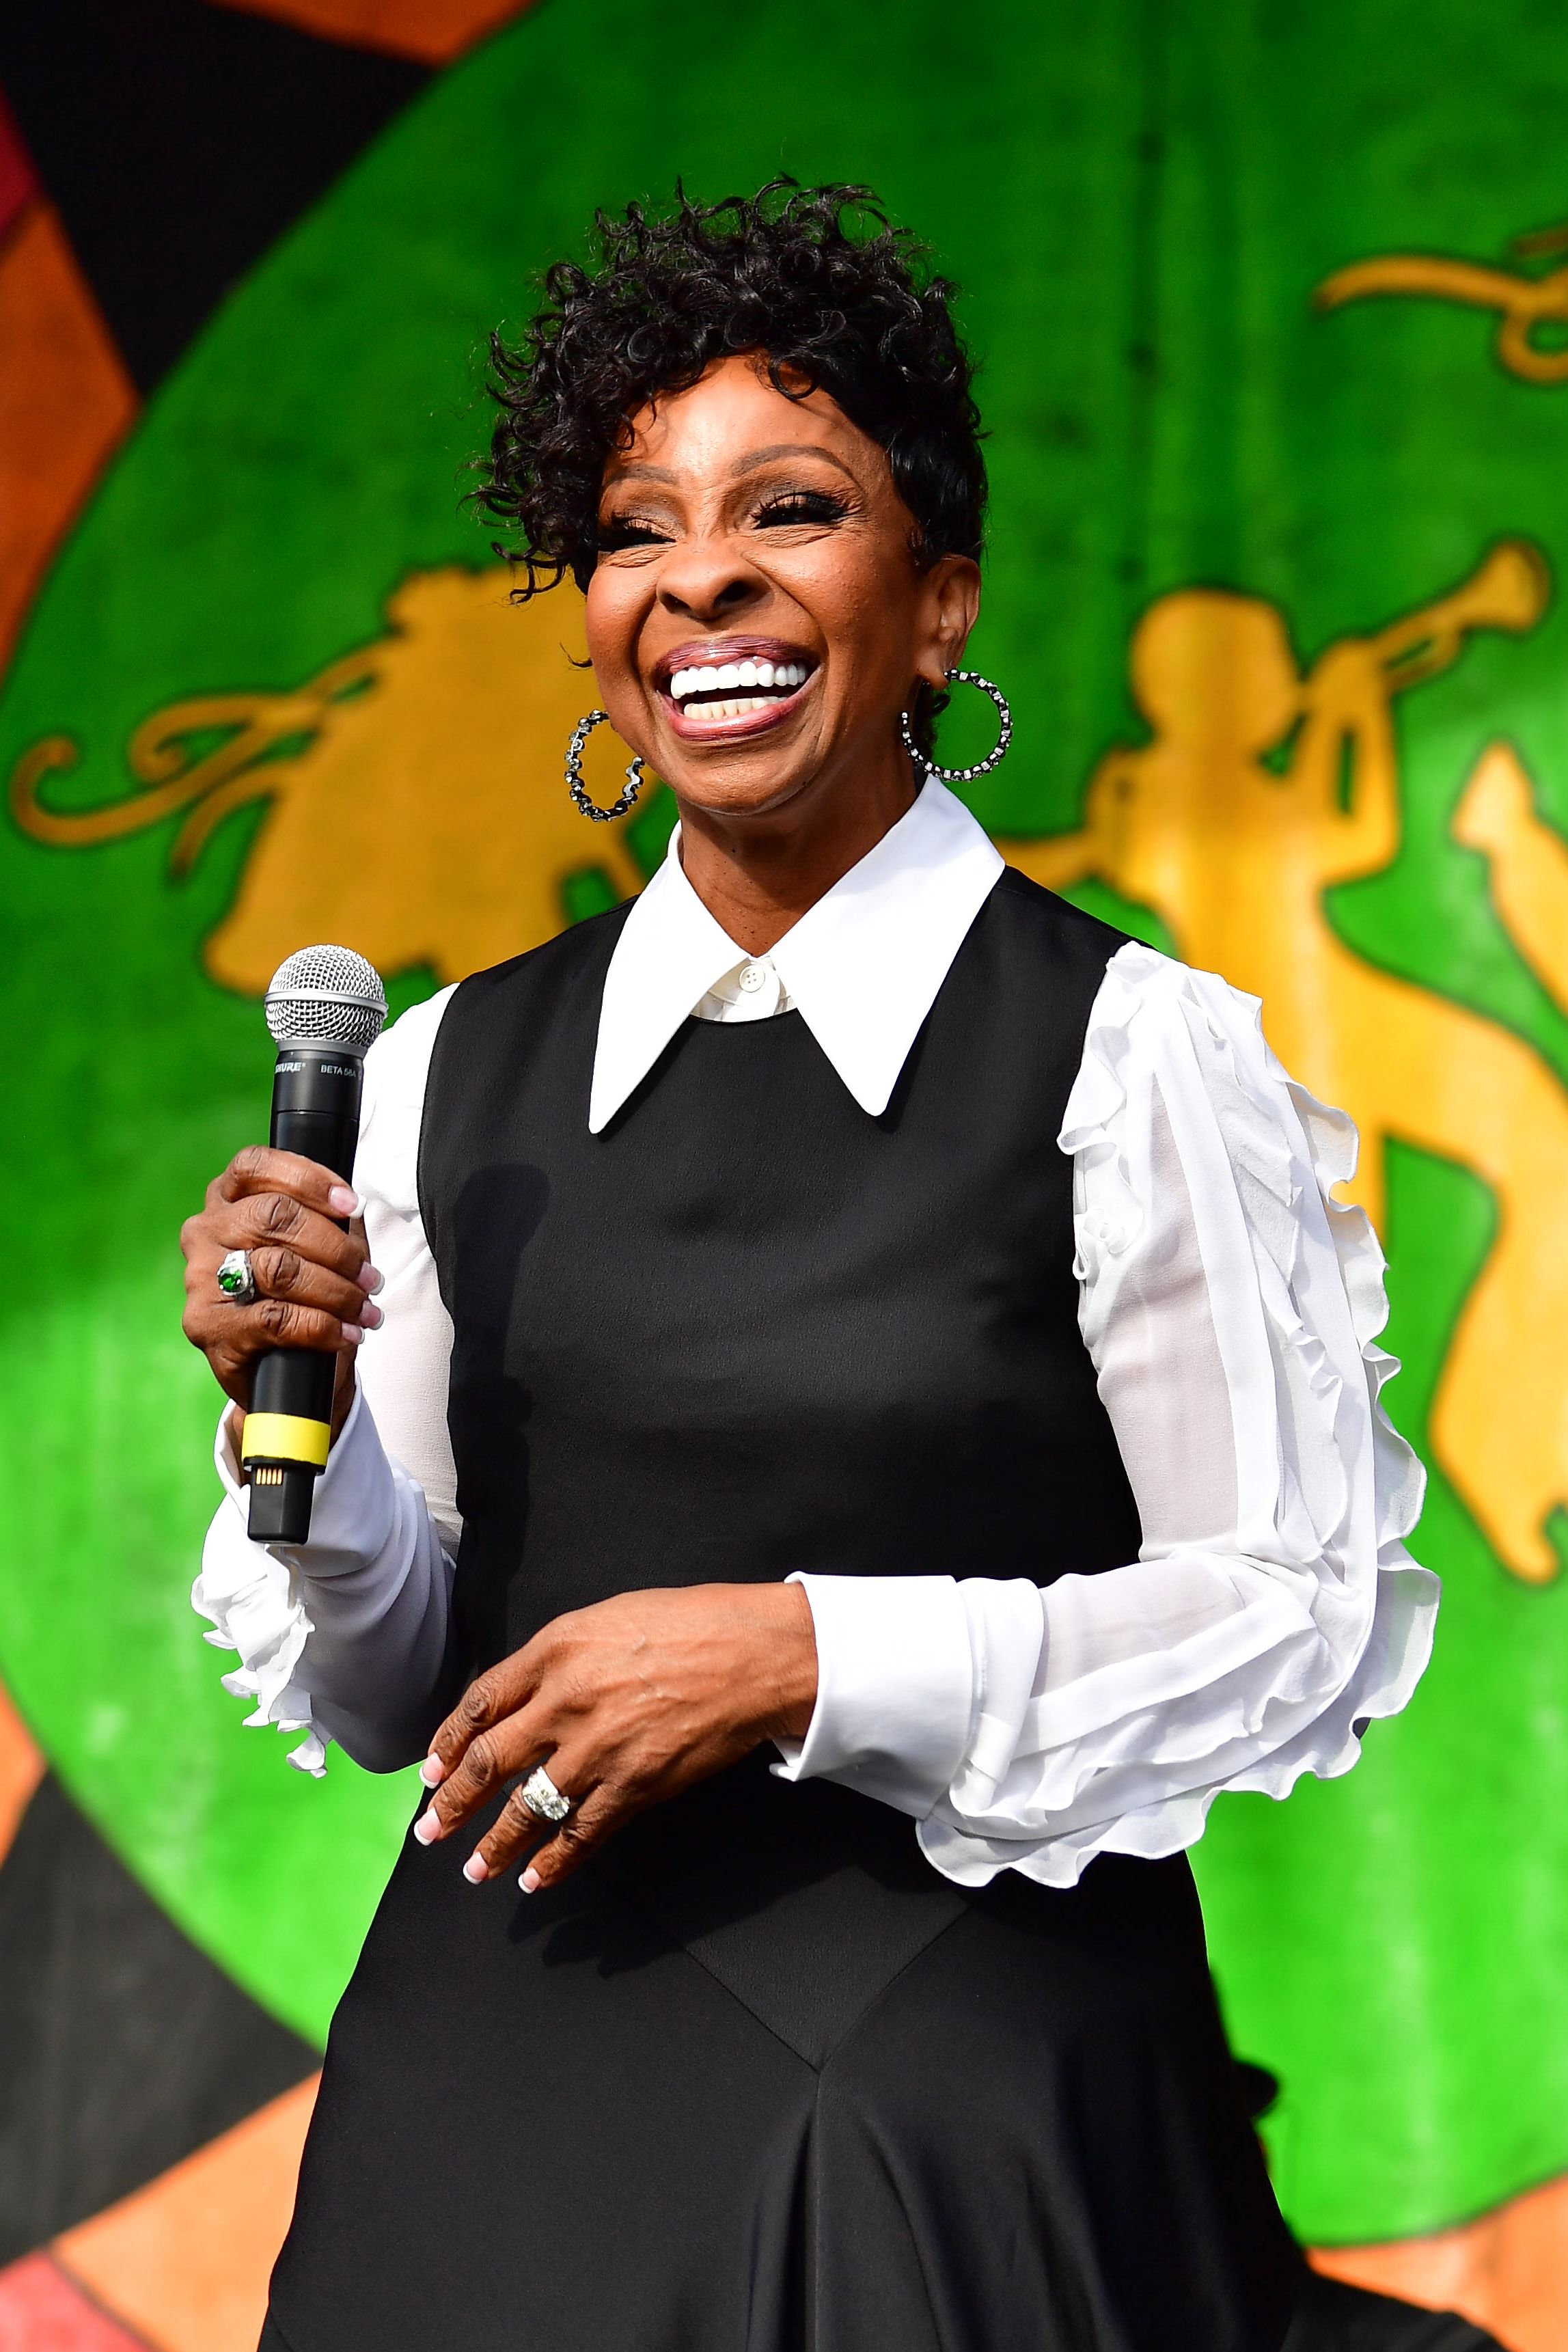 Gladys Knight during the 2019 New Orleans Jazz & Heritage Festival 50th Anniversary at Fair Grounds Race Course on May 03, 2019 in New Orleans, Louisiana. | Source: Getty Images